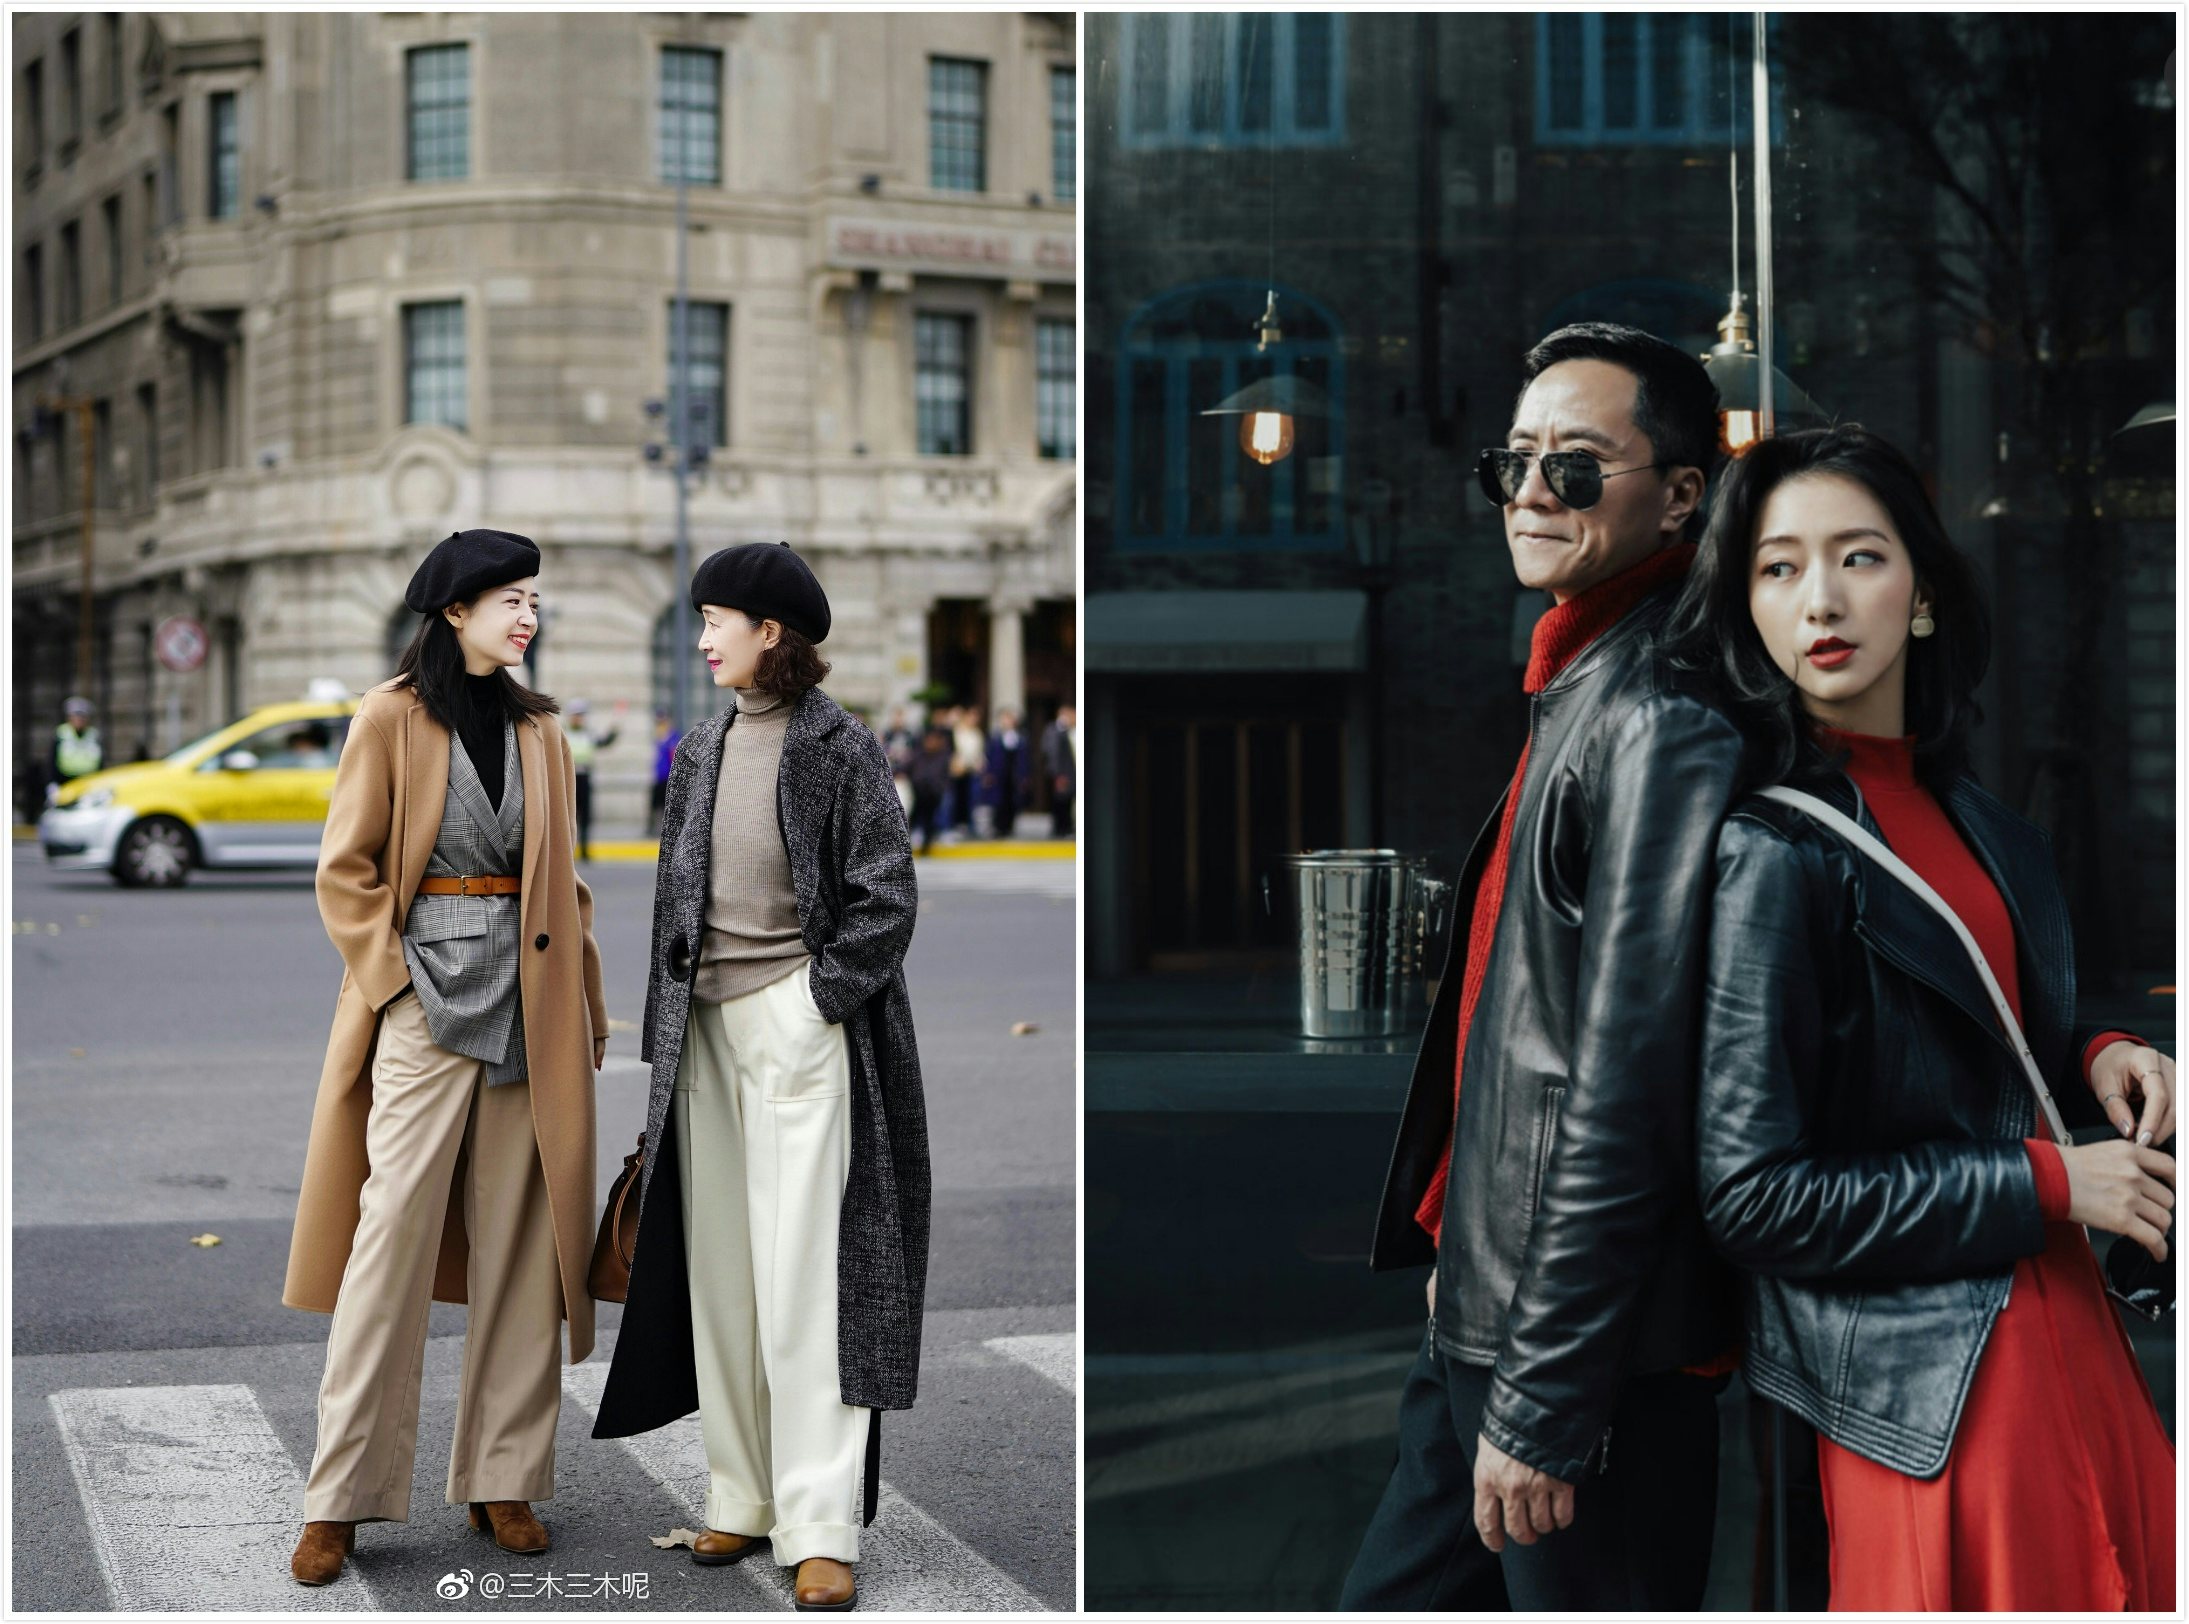 Family street fashion shoots. Photo: KOL @三木三木呢 with her mother on Xaiohongshu (left), Aceyiing with her father on Xiaohongshu (right).